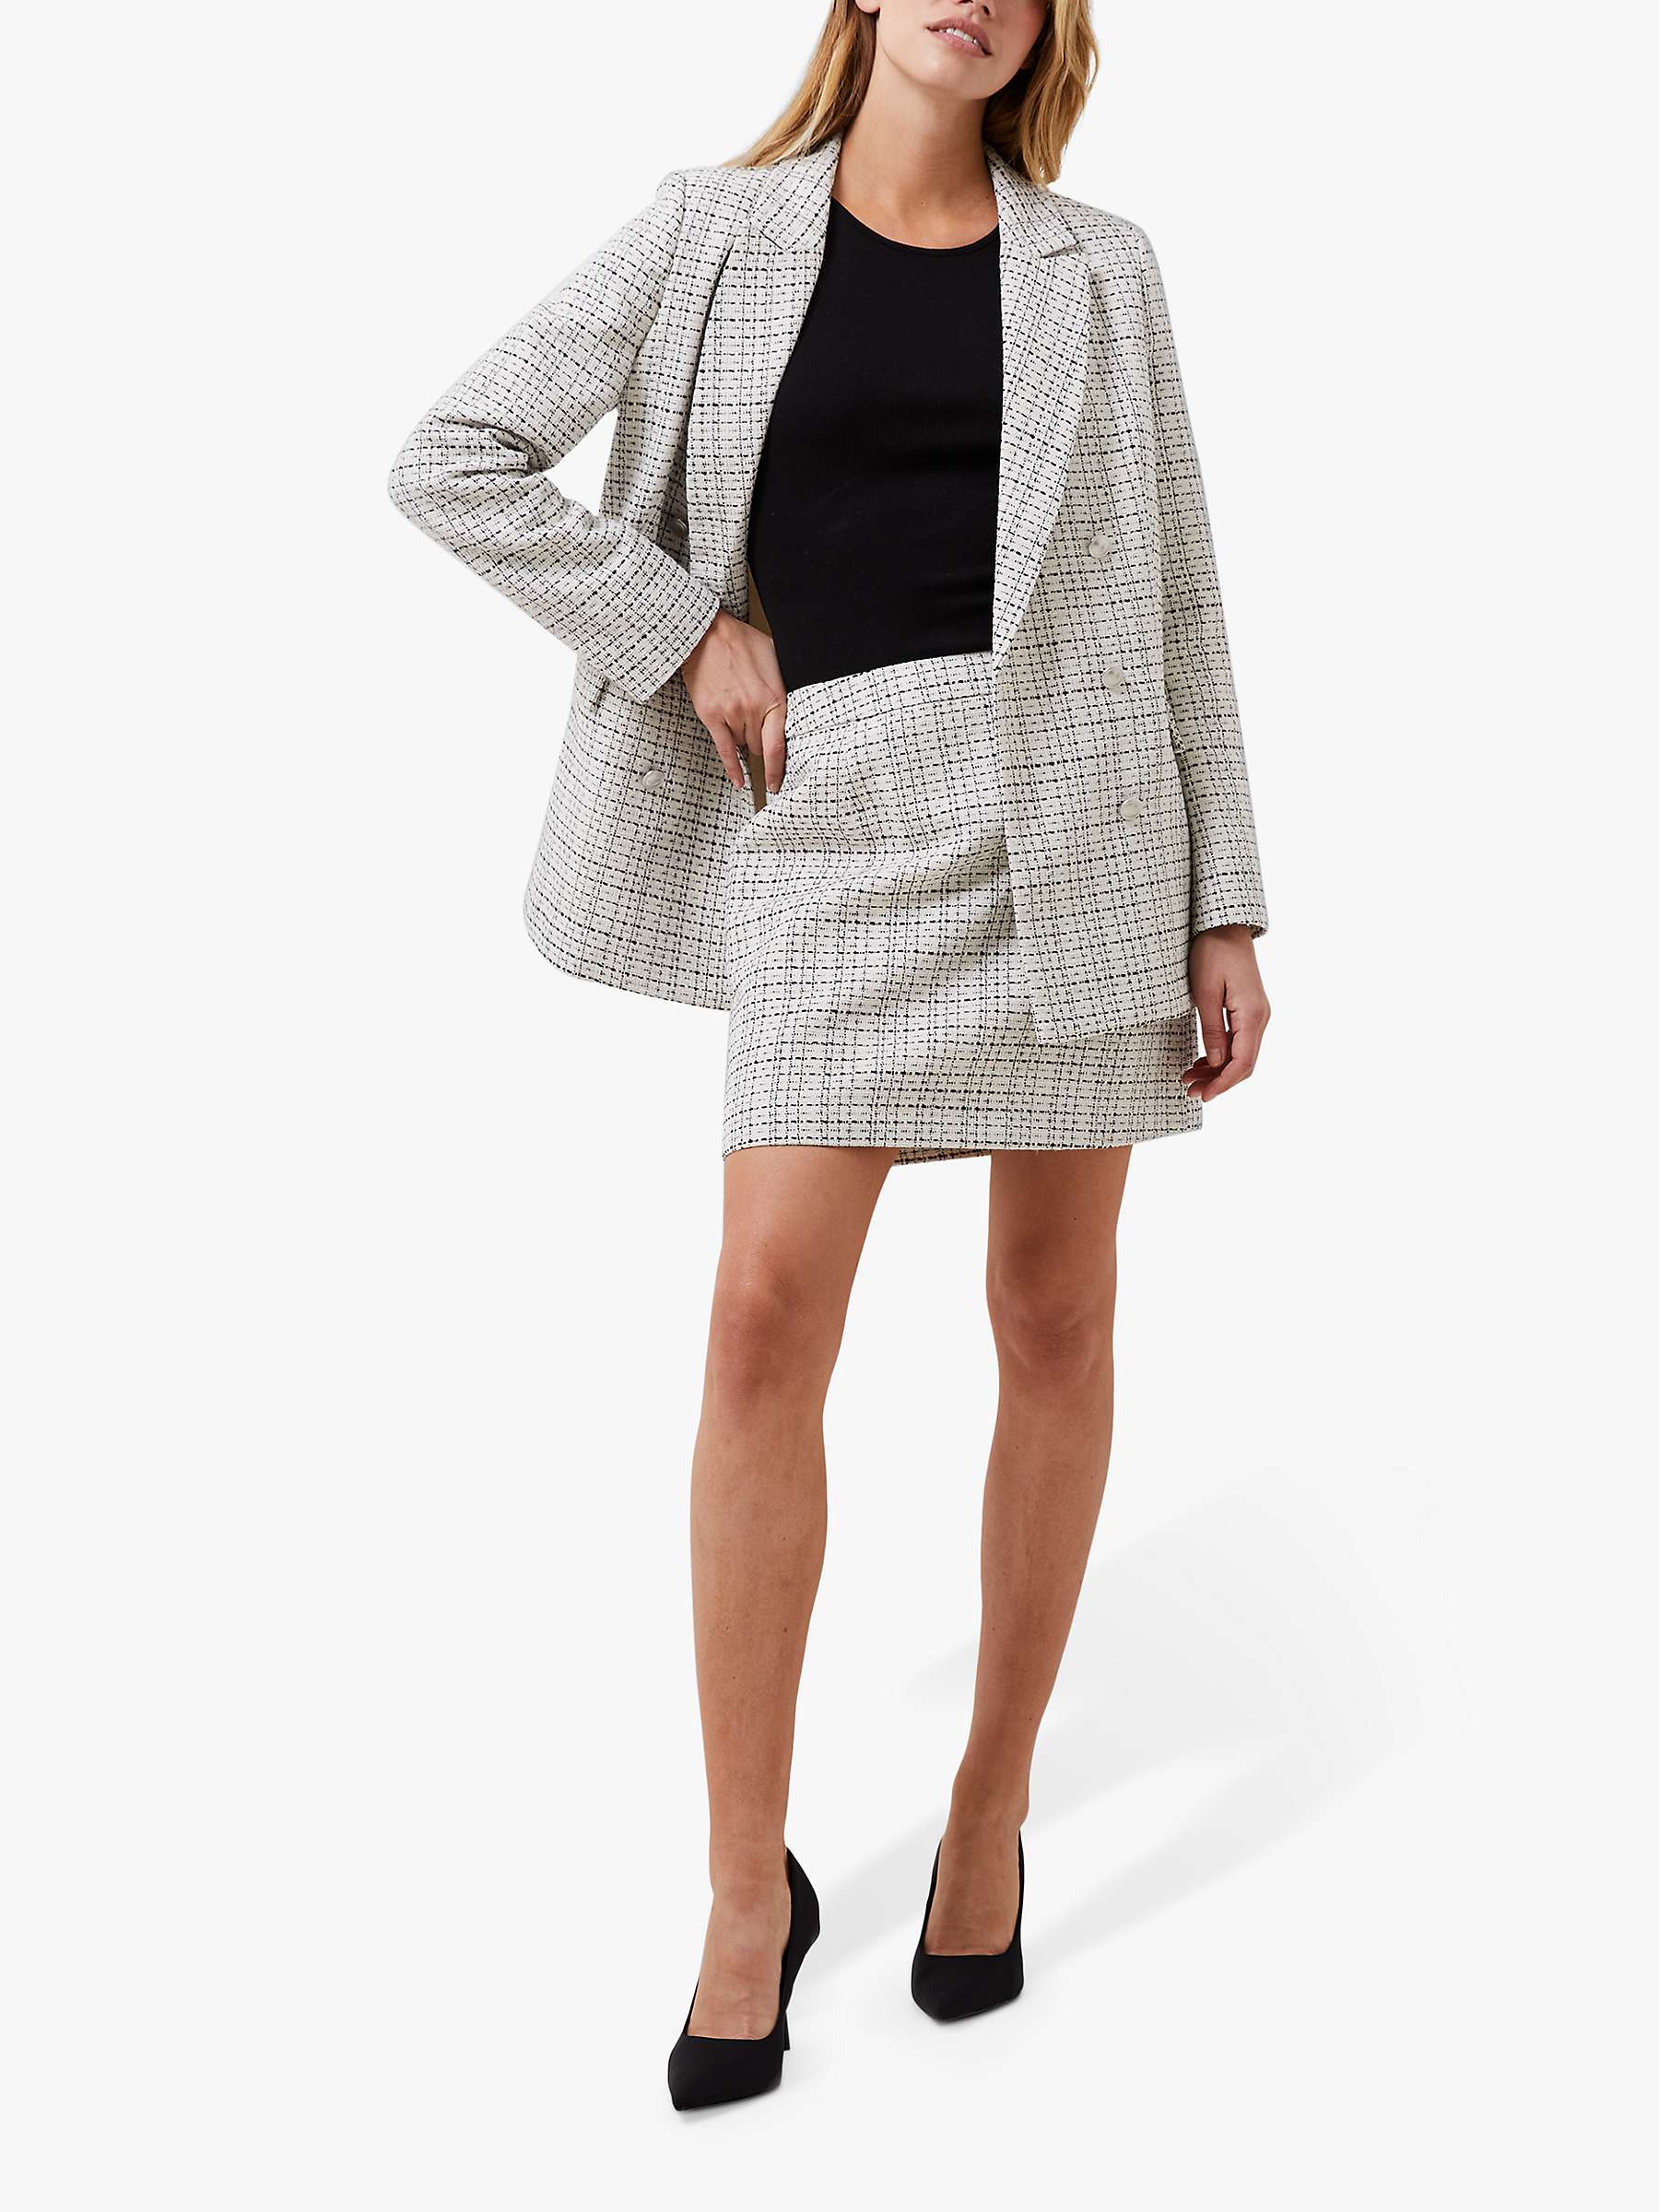 Buy French Connection Effie Boucle Mini Skirt, Cream/Black Online at johnlewis.com